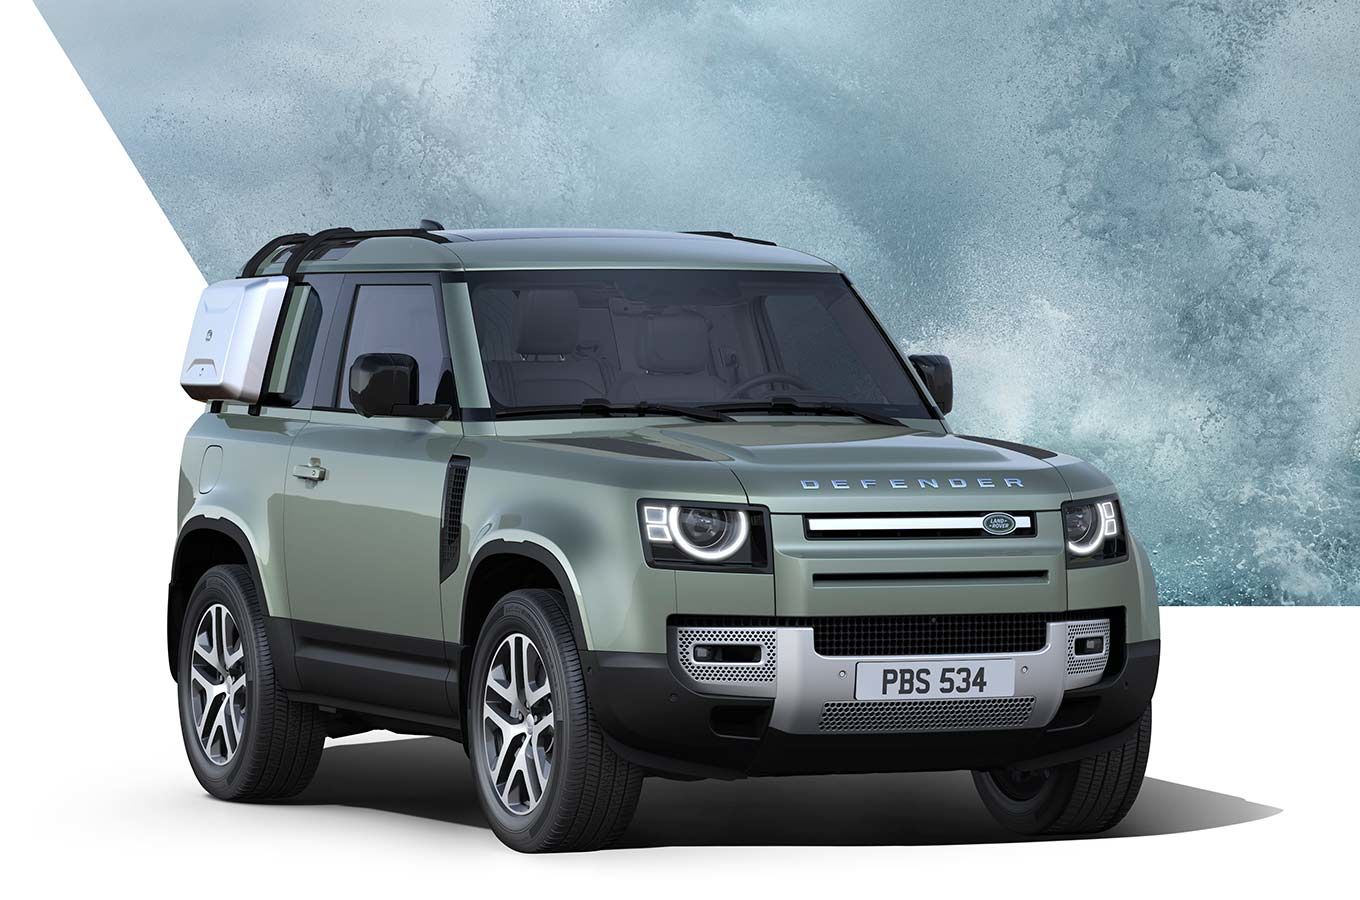 Range Rover Defender Qatar  : The 2021 Land Rover Defender Has Been Announced, But It Is Not Yet Available For Purchase.